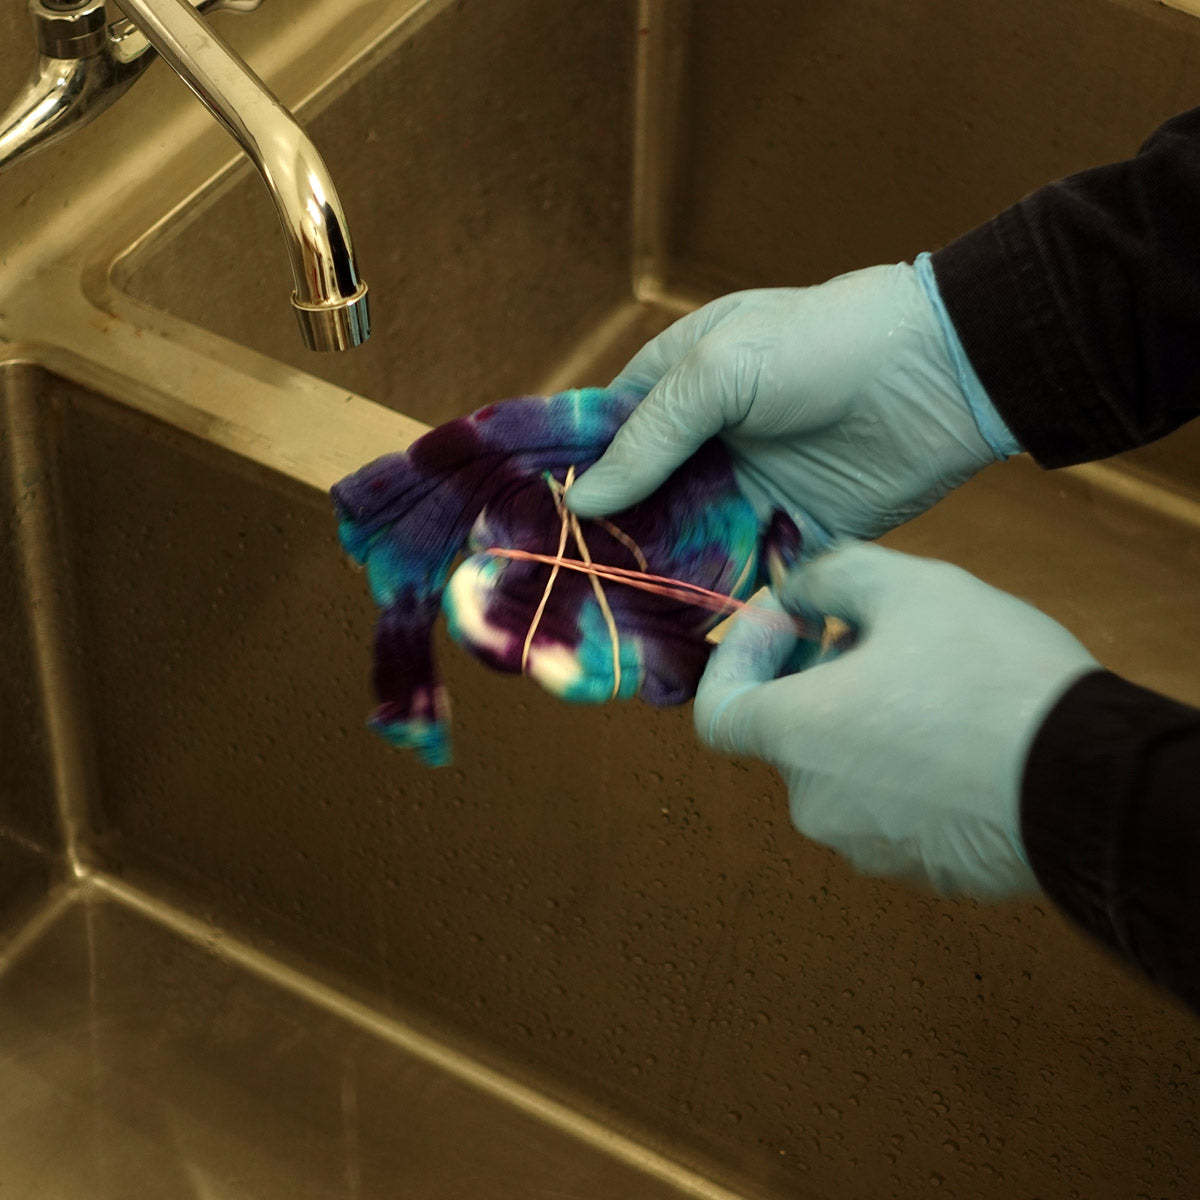 Removing rubber bands from tie-dyed socks before rinsing them in the sink